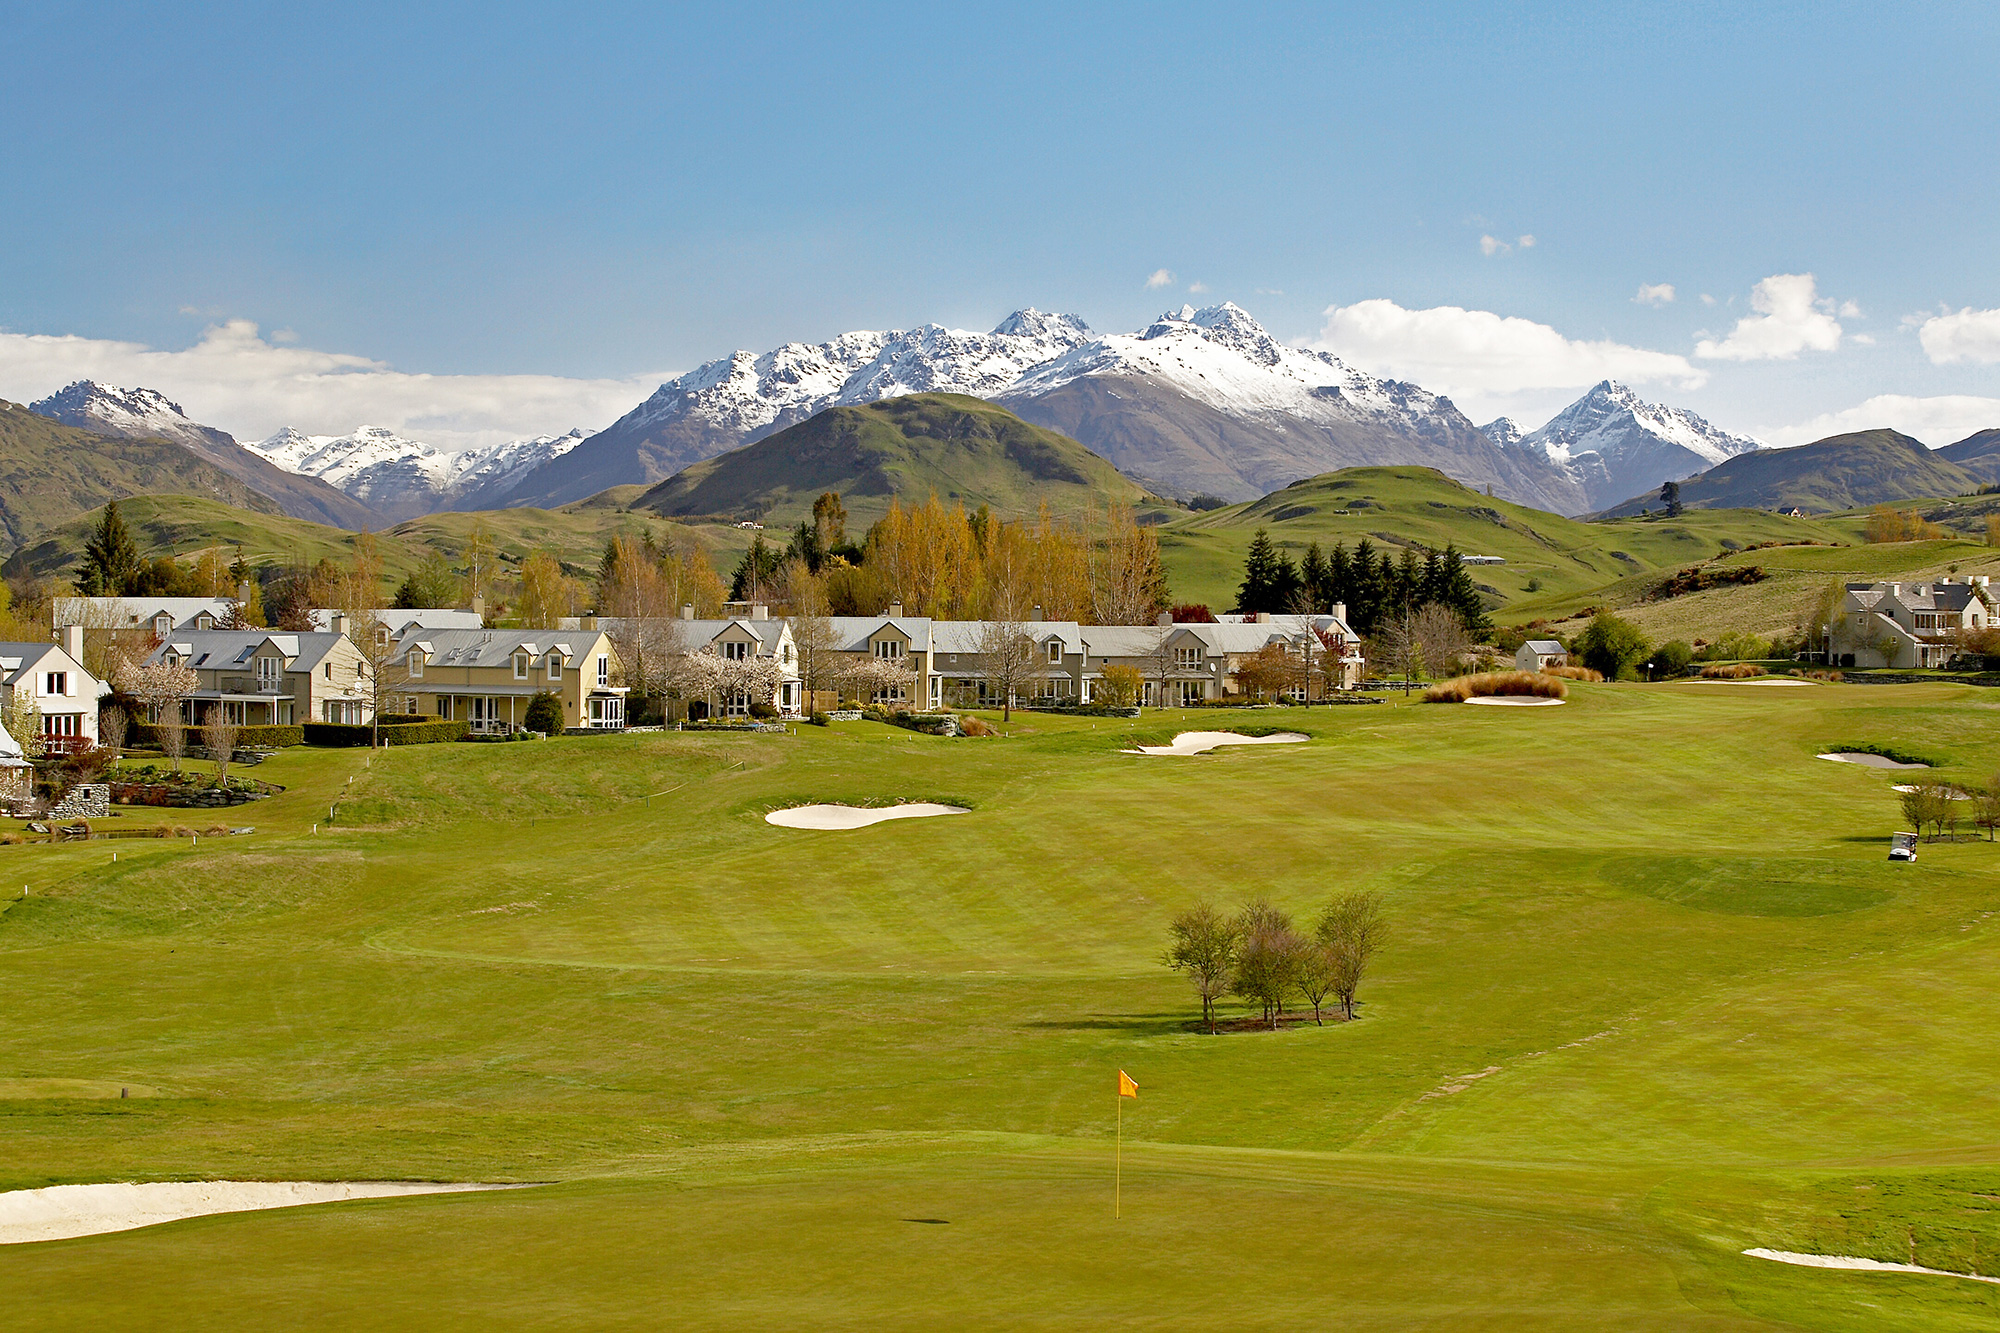 View over Millbrook Resort and golf course to the mountains